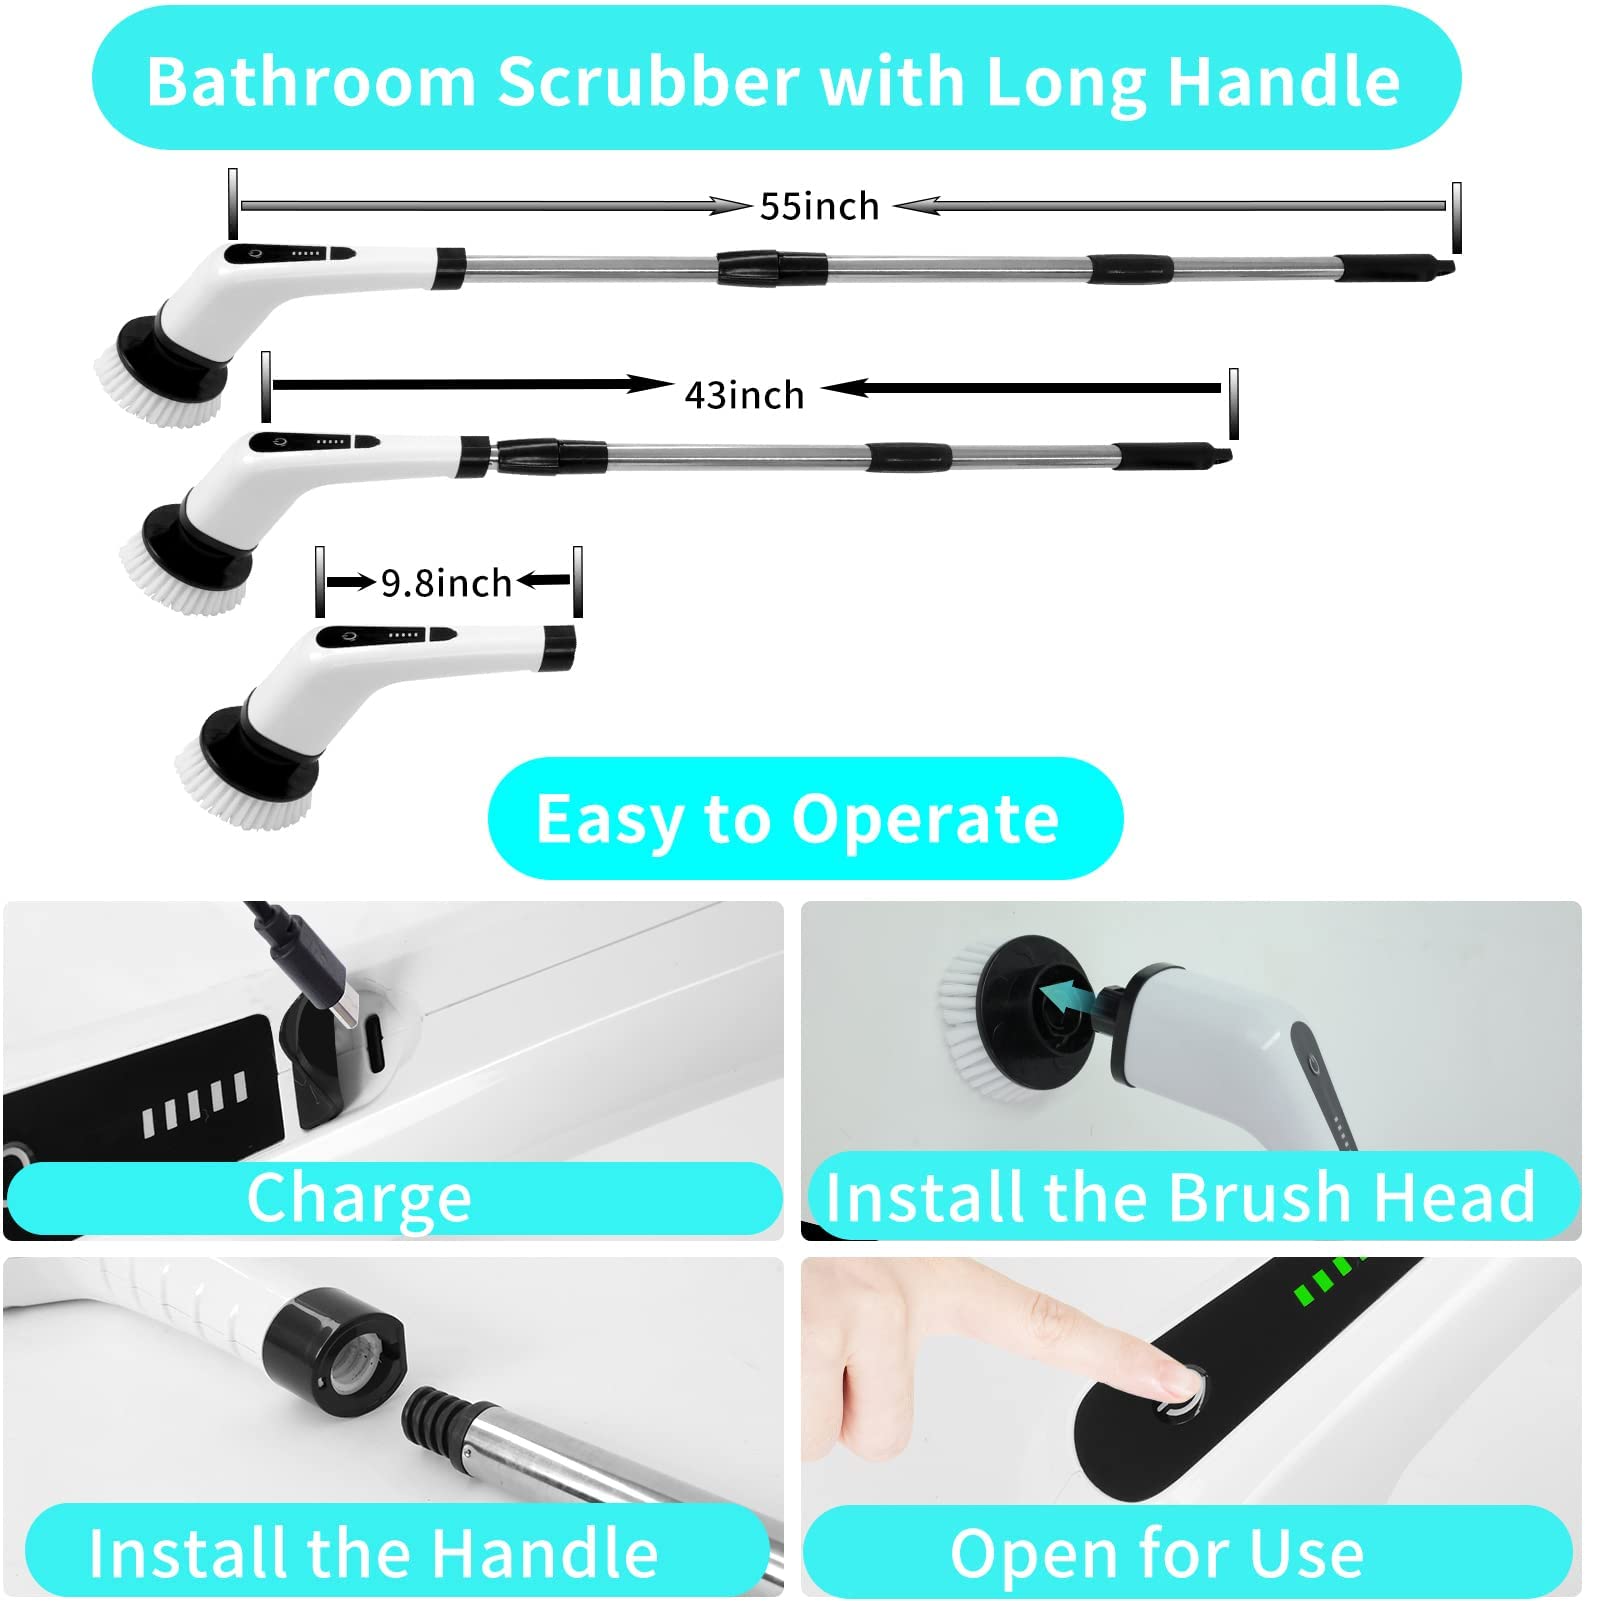 Electric Spin Scrubber, Cordless Shower Scrubber for Cleaning with 7 Multi-Purpose Cleaning Brush Heads, Bathroom Scrubber with Long Handle, Power Scrubber for Cleaning Wall, Floor, Bathroom, Kitchen